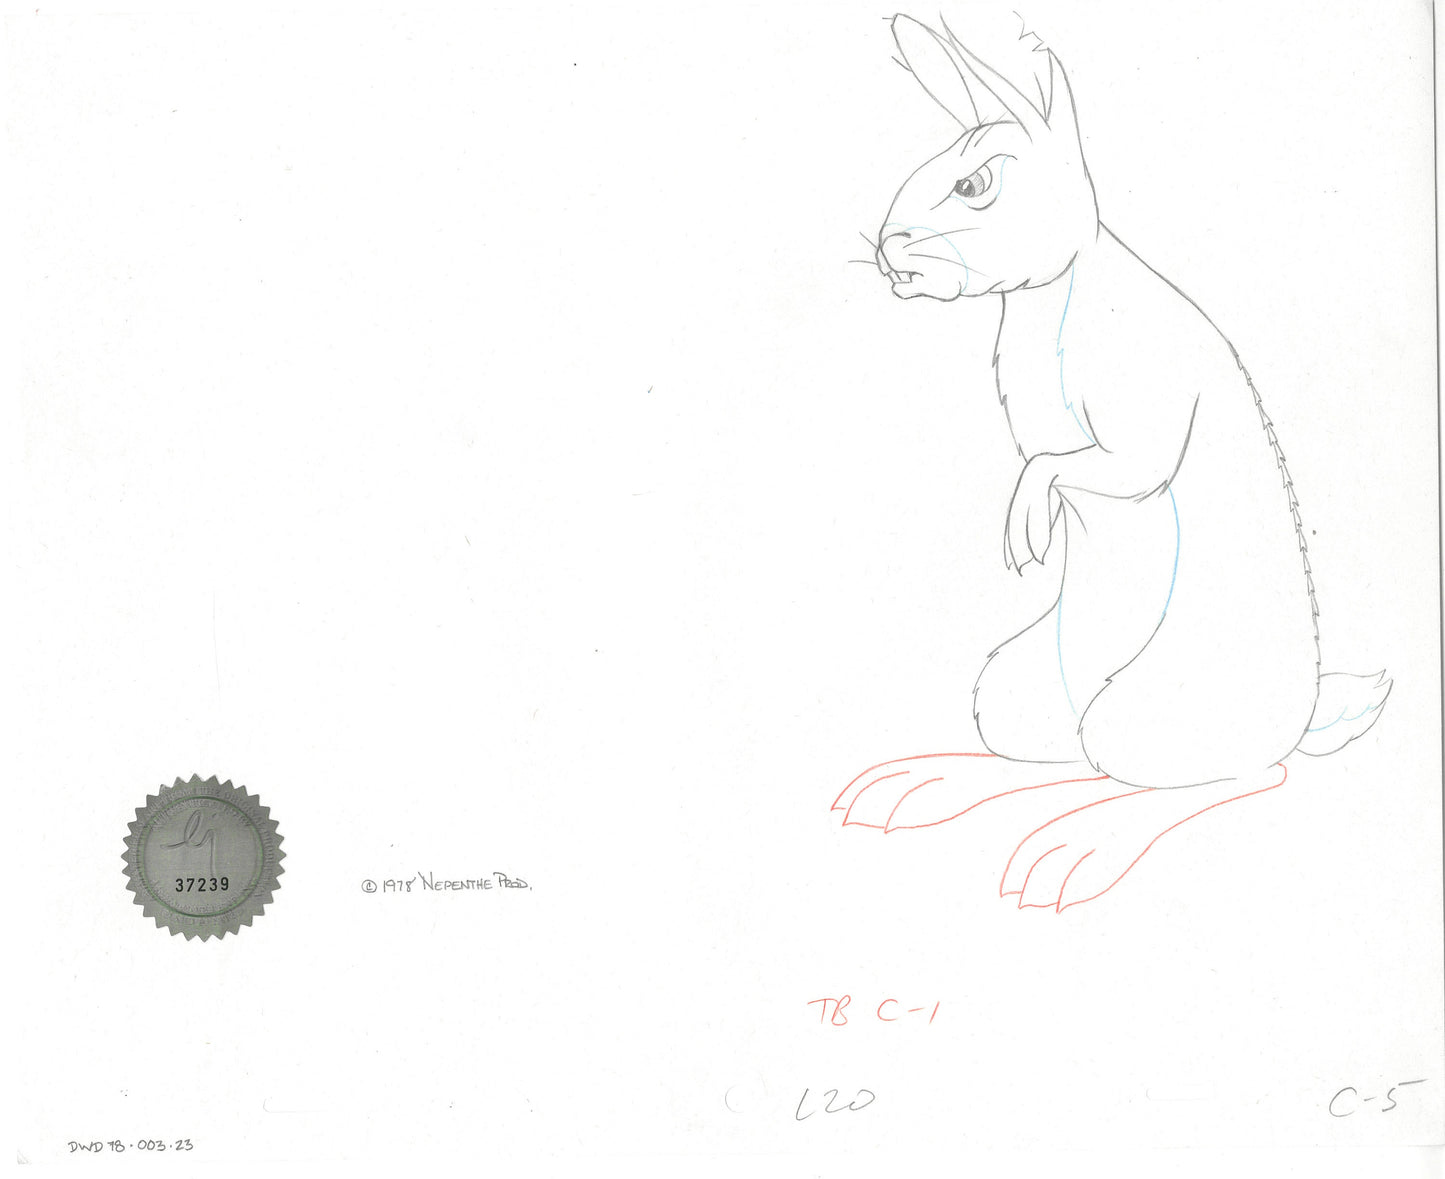 Watership Down 1978 Production Animation Cel Drawing with Linda Jones Enterprise Seal and Certificate of Authenticity 003-23